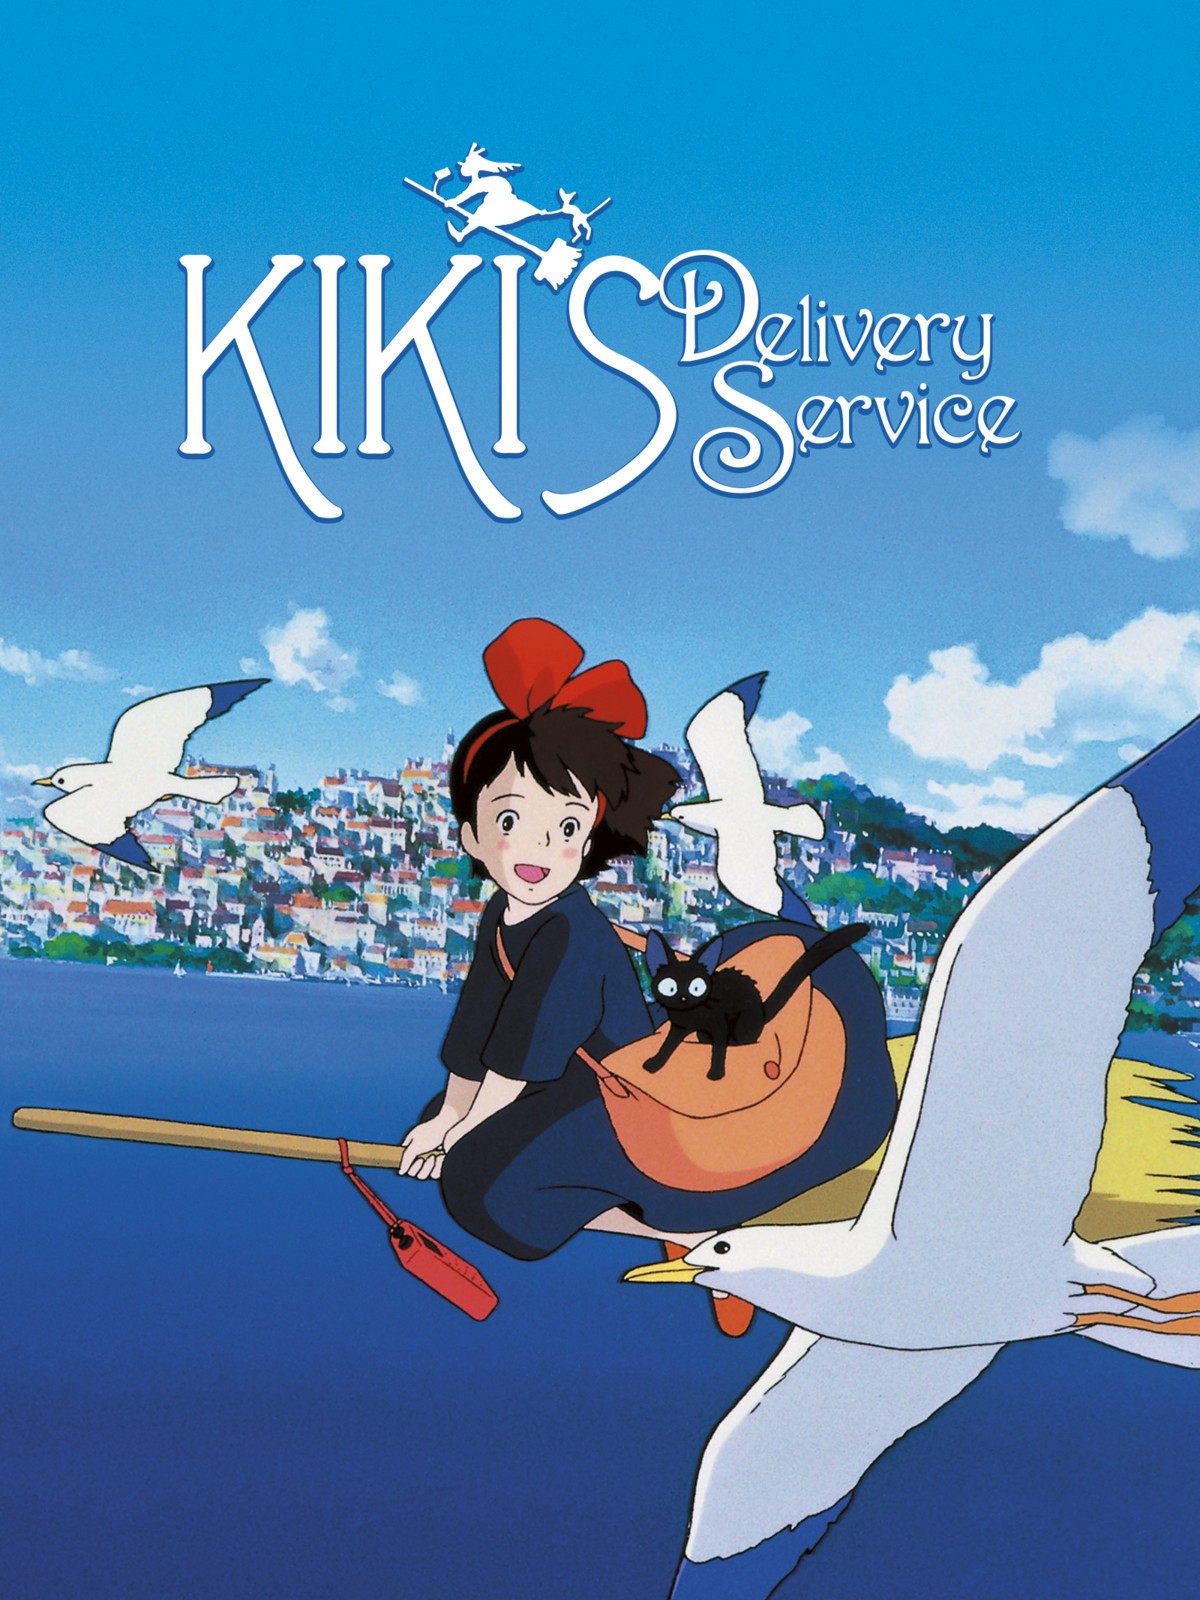 Kiki’s Delivery Service Symbolism and Story Structure